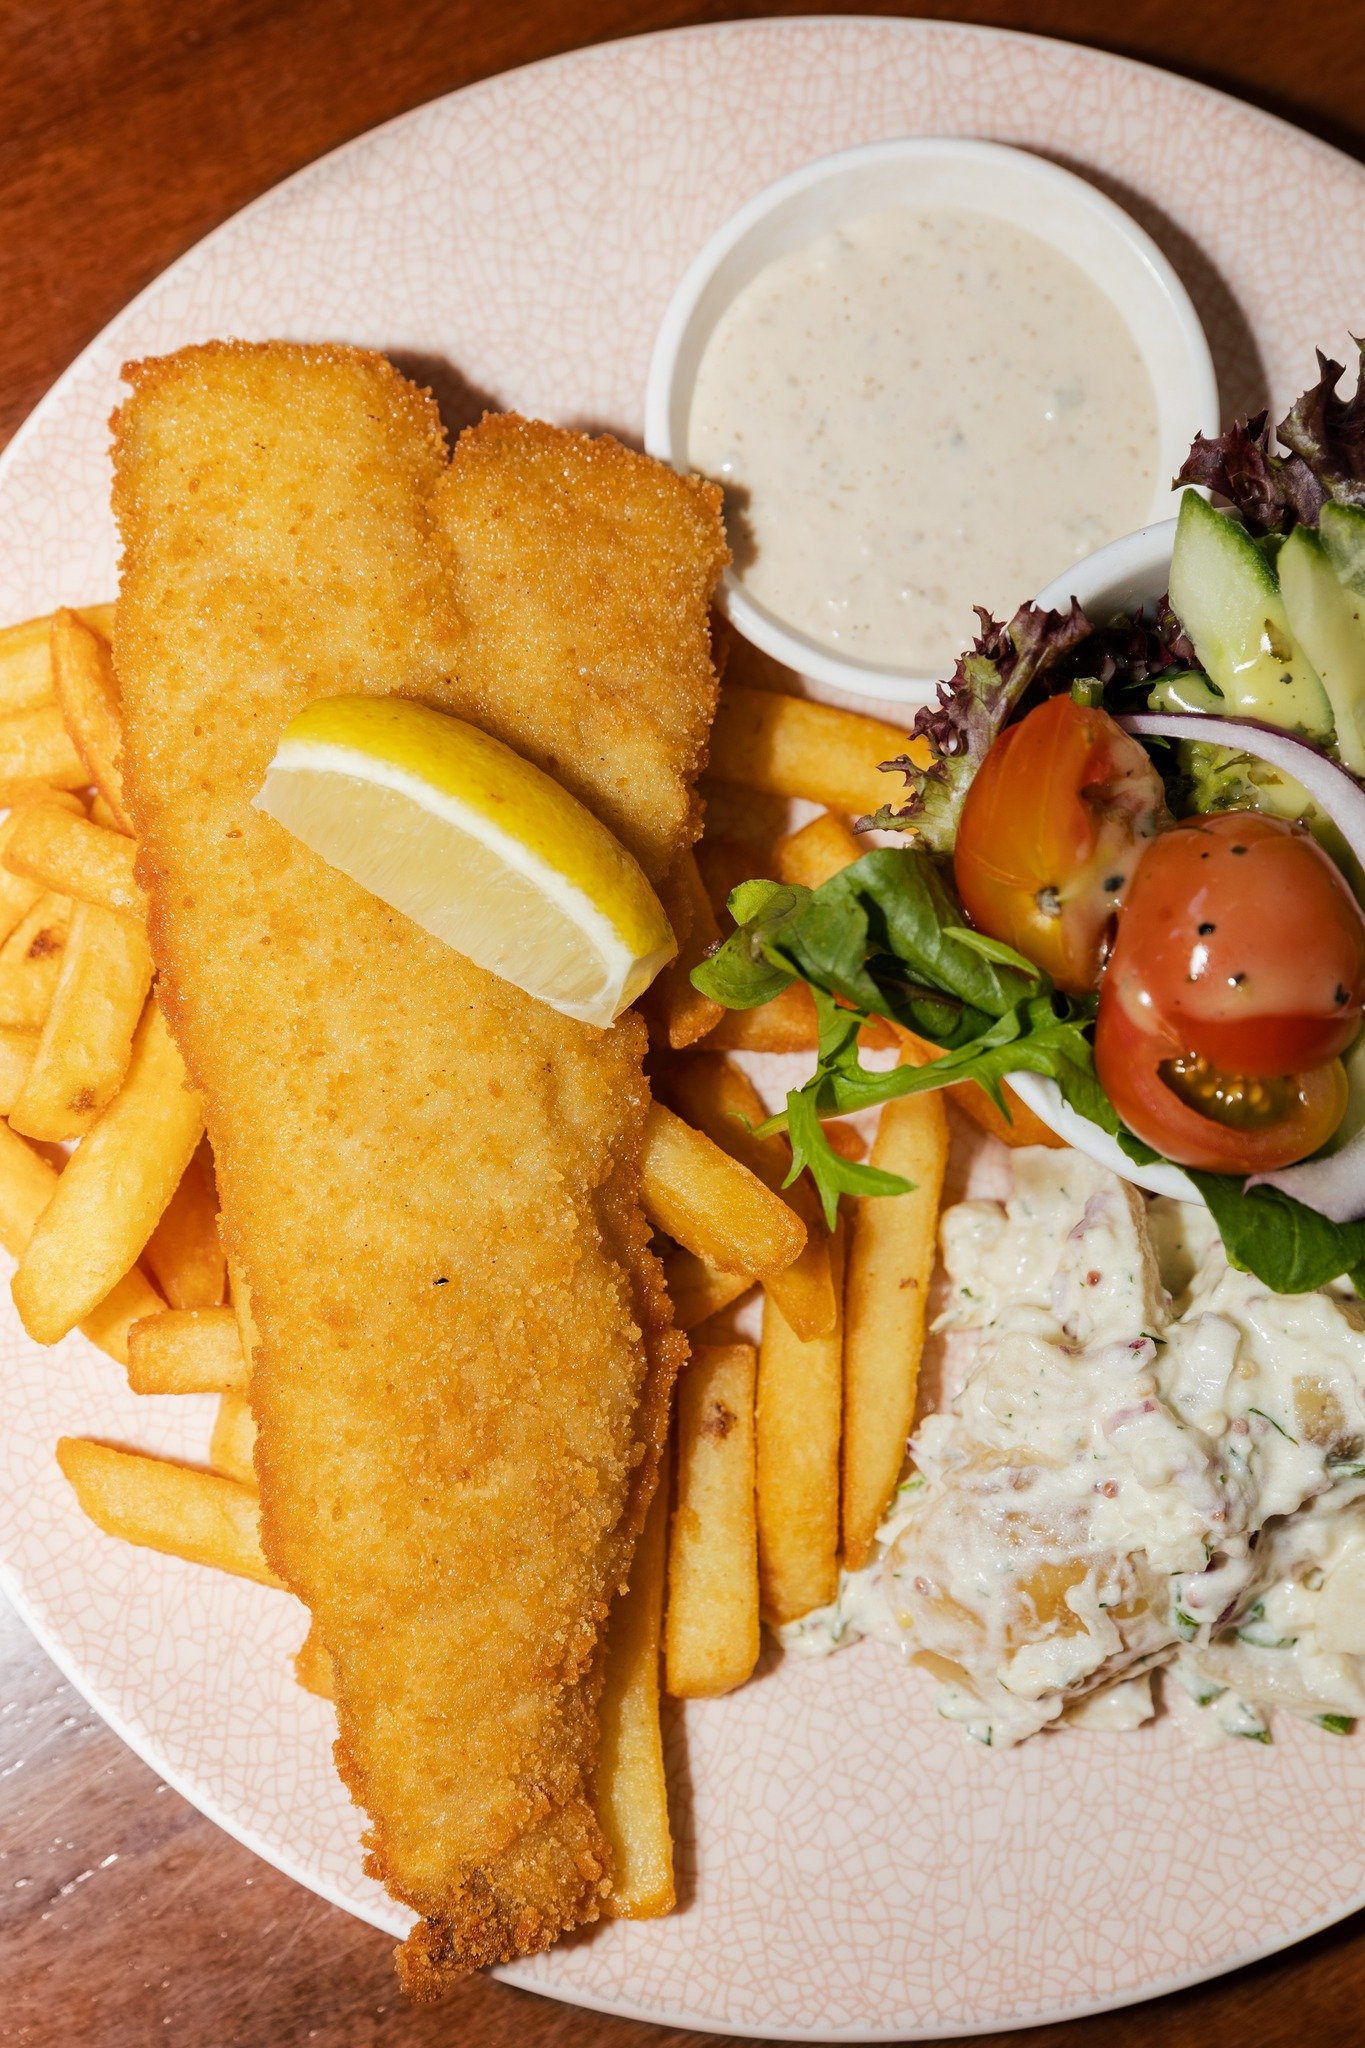 Crispy and golden 🤩

Which one is your favourite - schnitty or fish? 🤔

Book here 👉 www.challagardenshotel.com.au